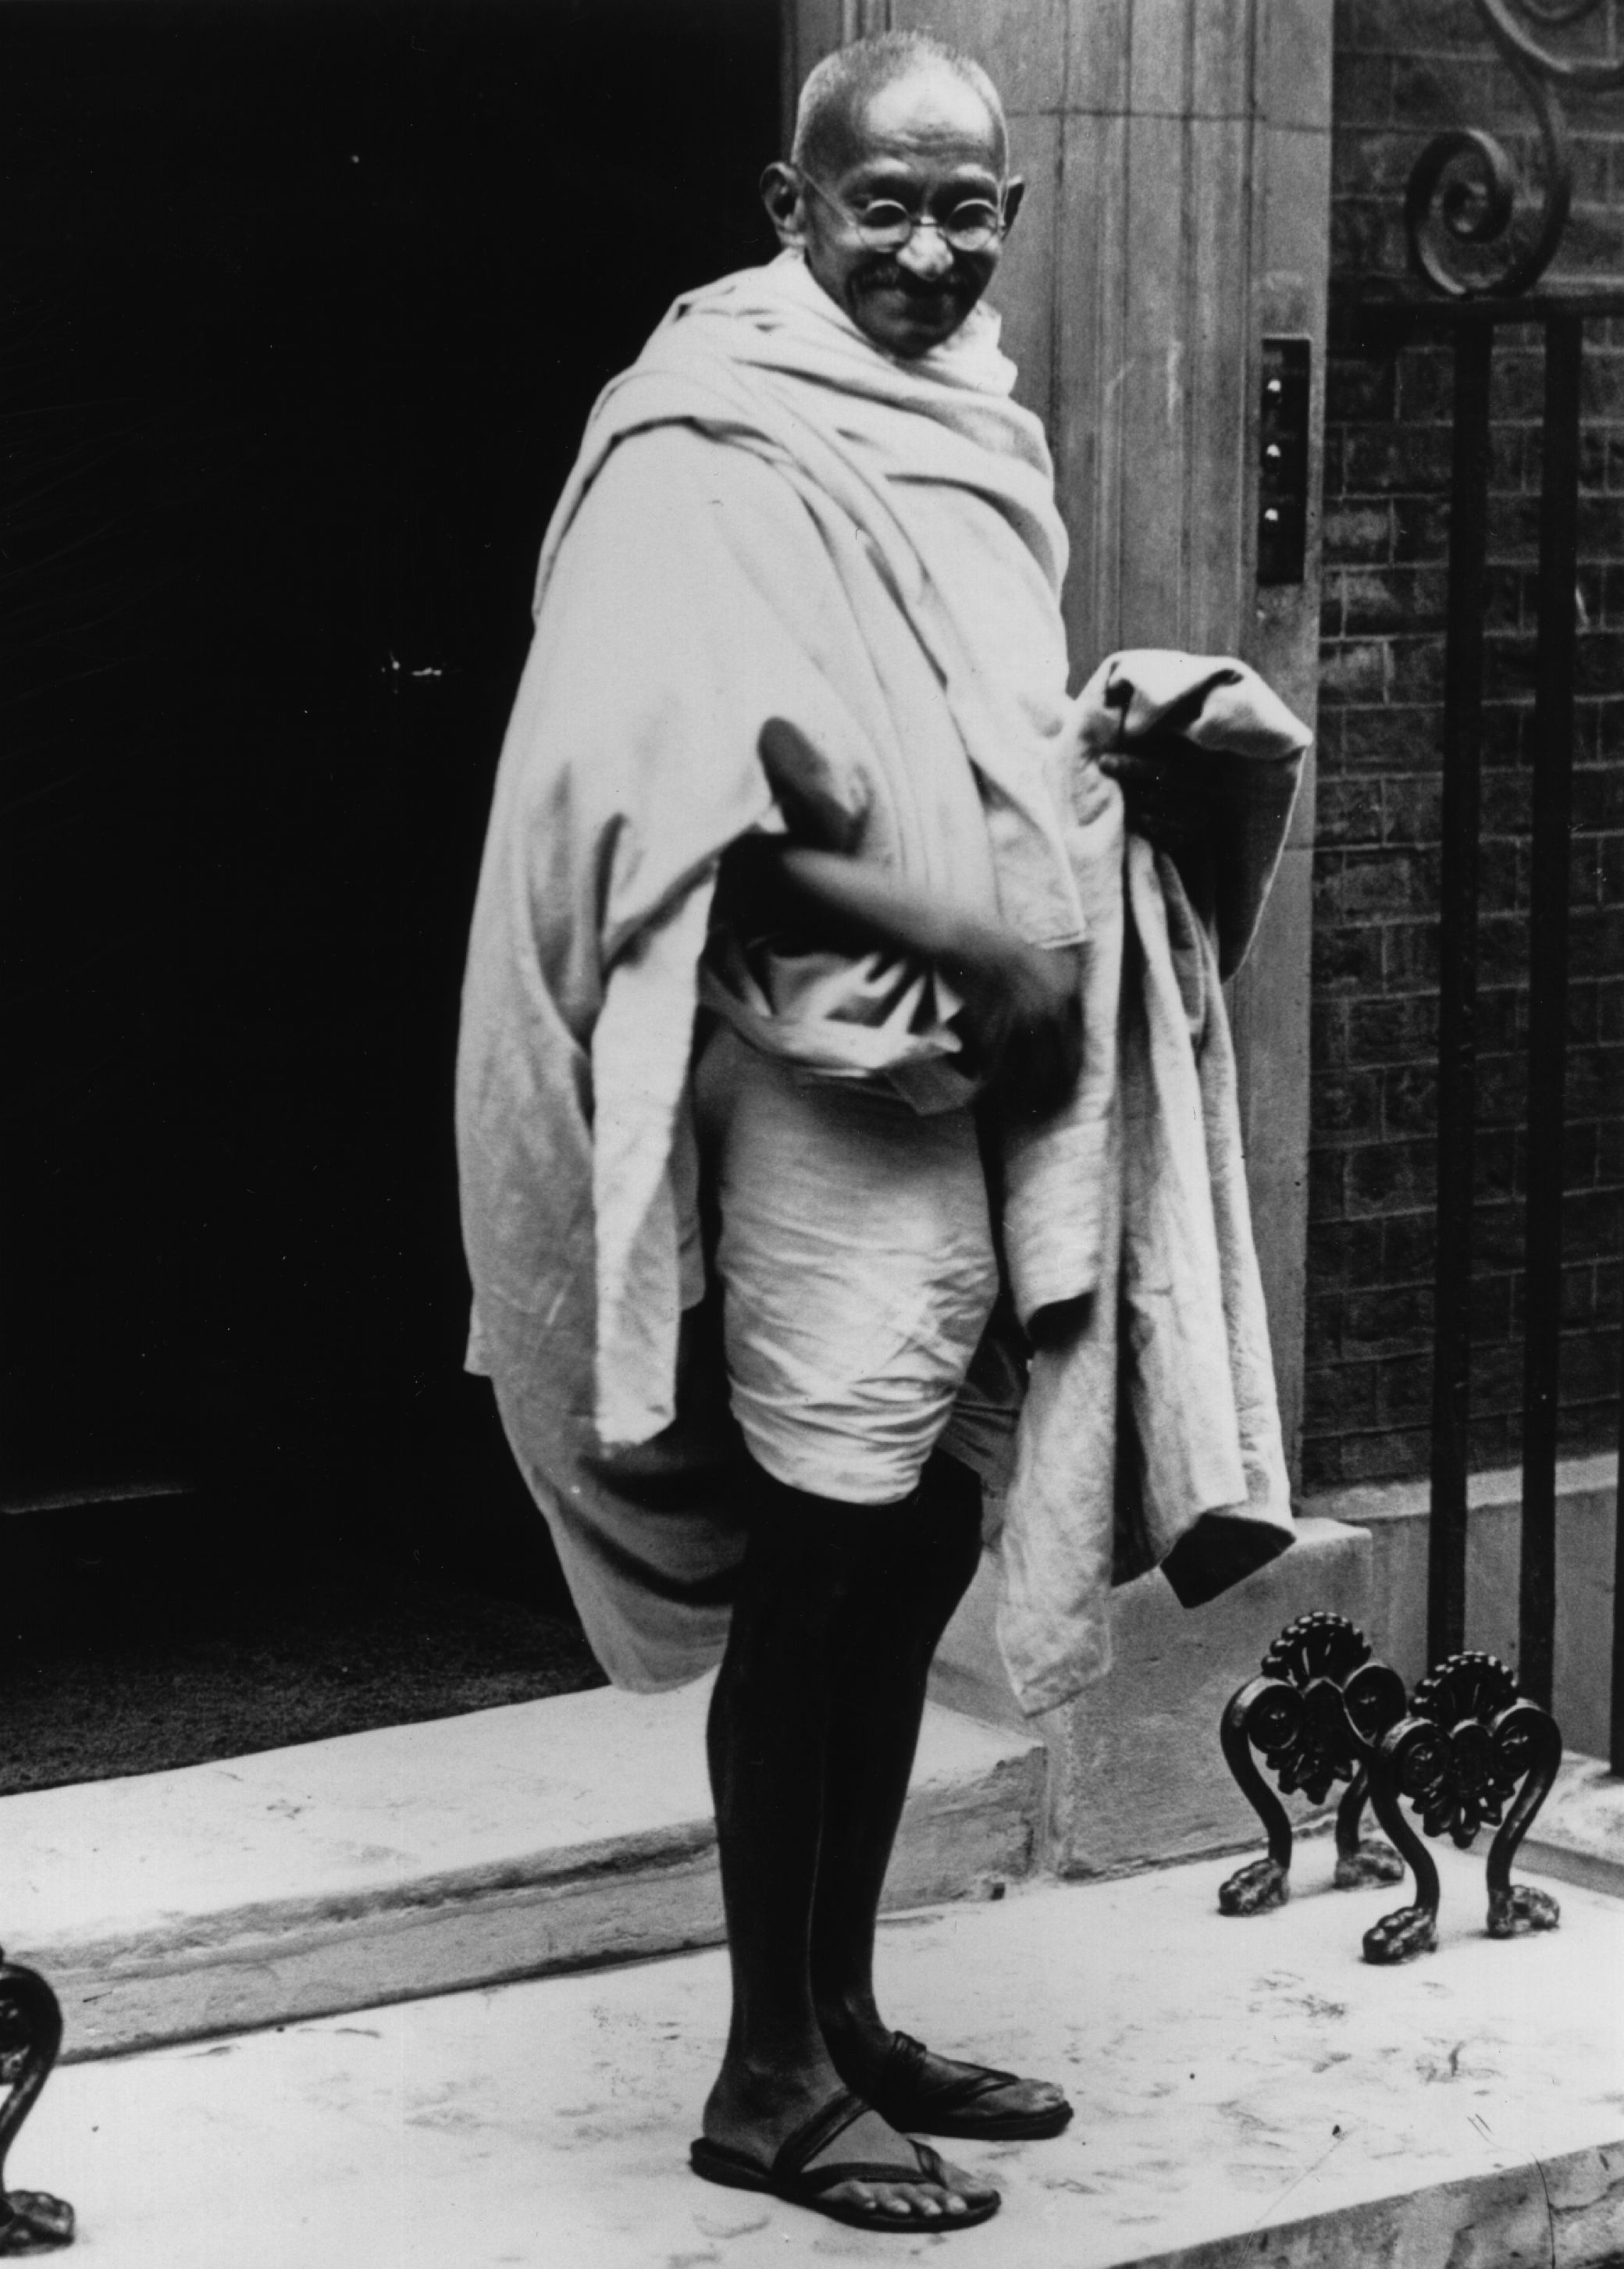 3rd November 1931: Mahatma Gandhi (Mohandas Karamchand Gandhi, 1869 - 1948) arriving at No 10 Downing Street, London, for a conference with Prime Minister Ramsay Macdonald. (Photo by J. Gaiger/Topical Press Agency/Getty Images)